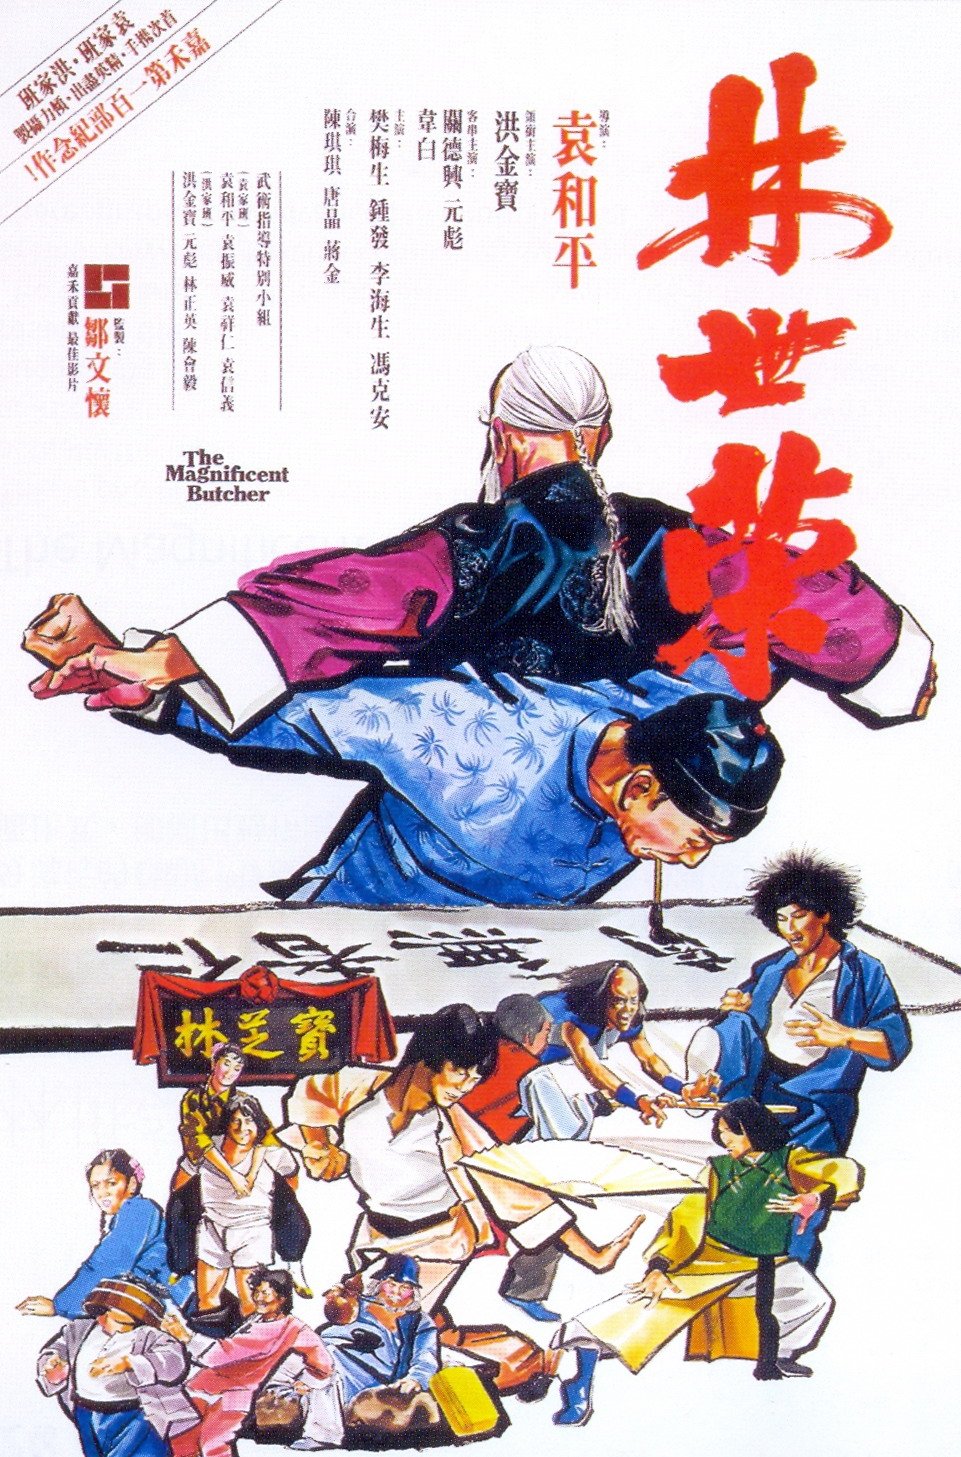 Cantonese poster of the movie Magnificent Butcher